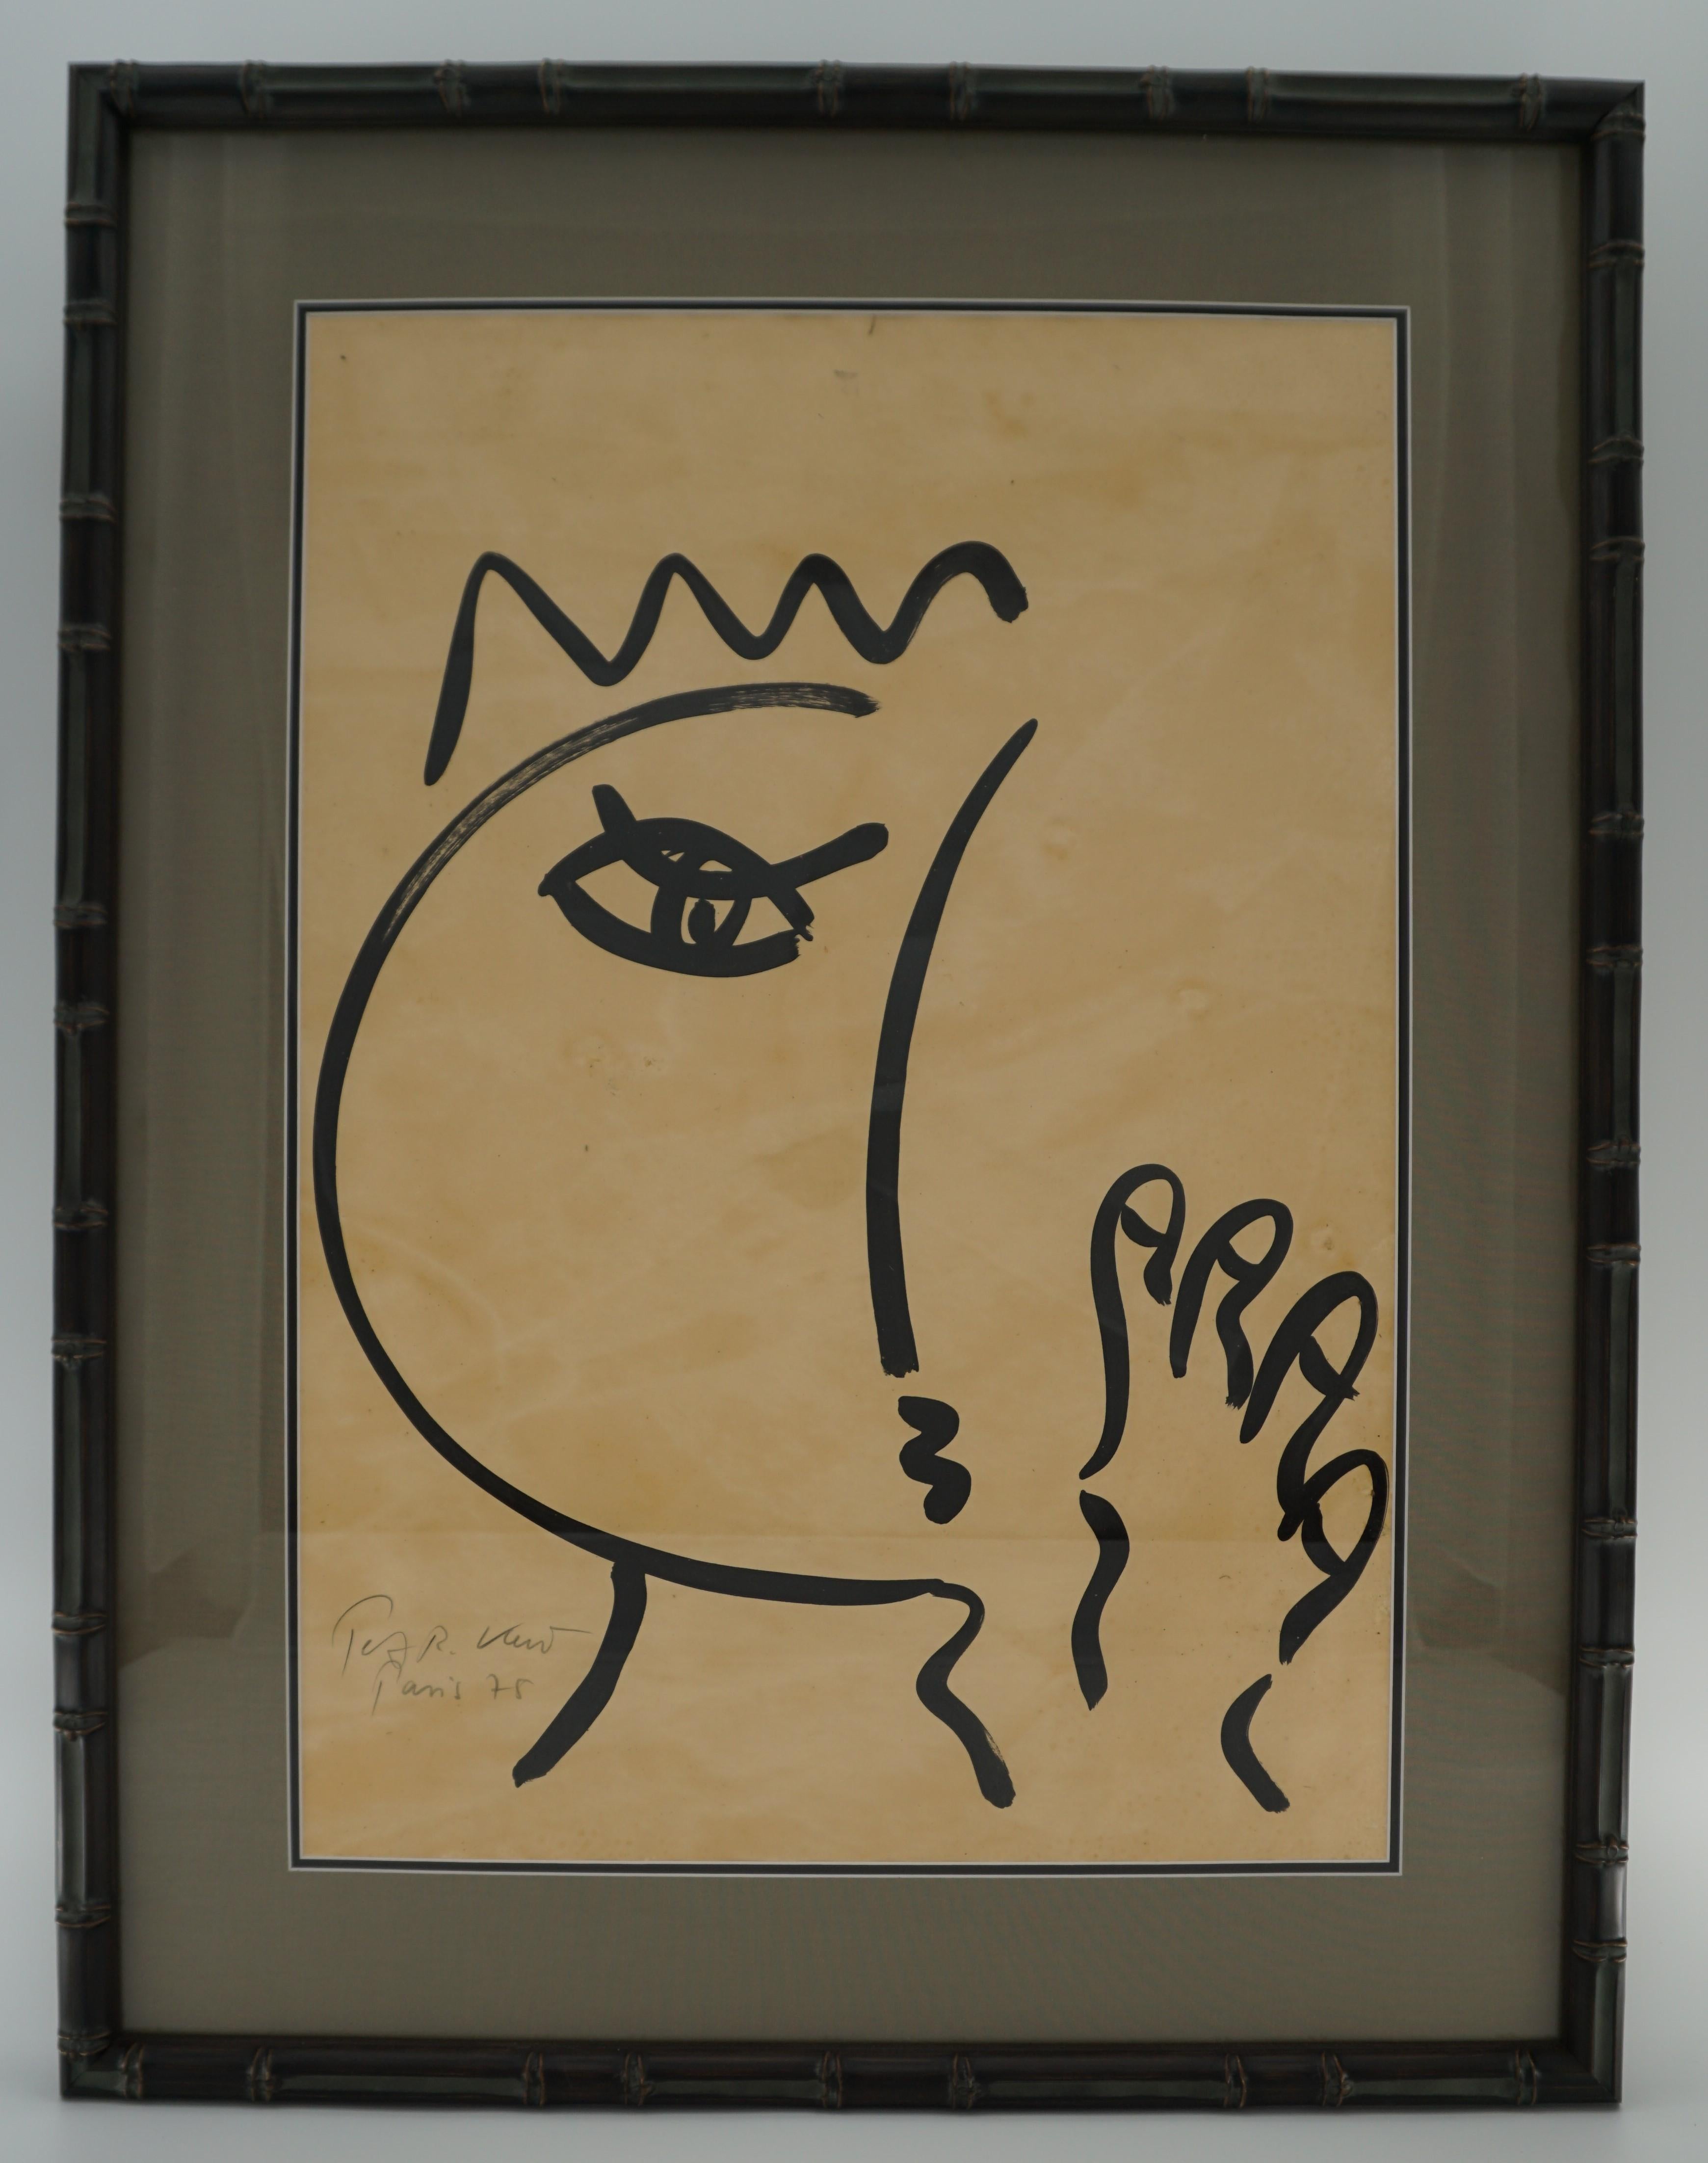 Painting by Peter Keil, C 1975, New Frame with Linen Matting, Signed, on Paper 6